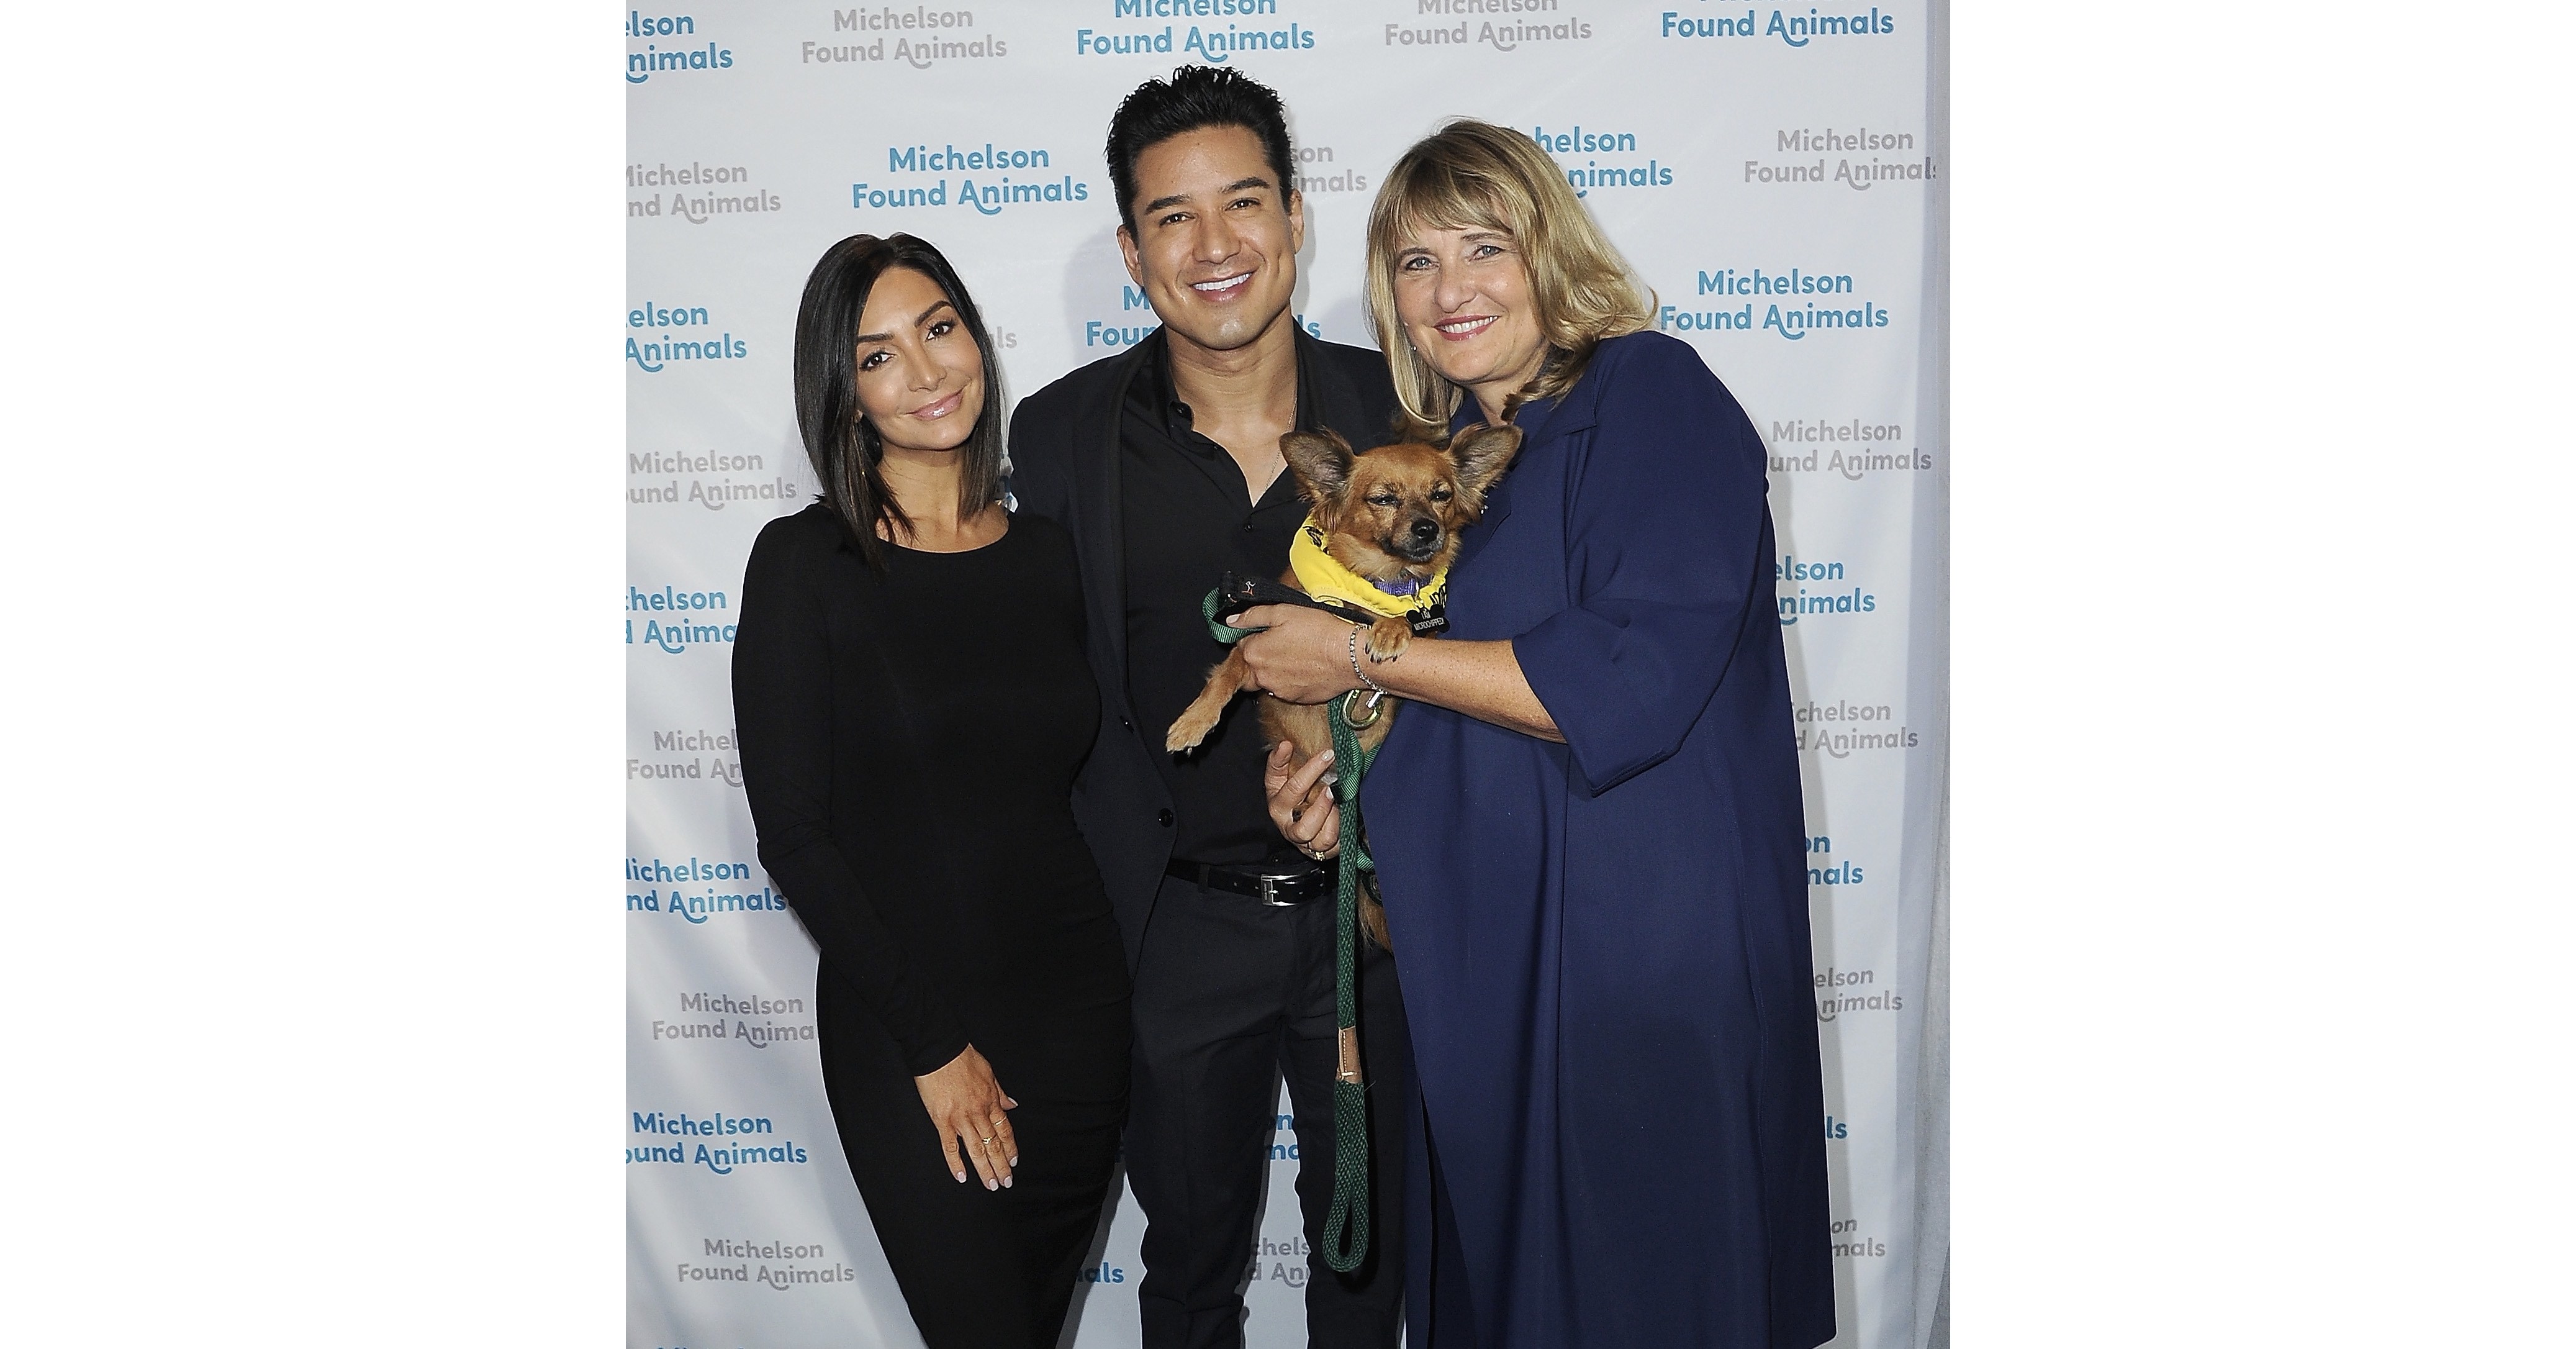 Dr. Gary Michelson And Ayla Michelson Host 8th Annual Michelson Found  Animals Foundation Gala Celebrating Animal Advocacy